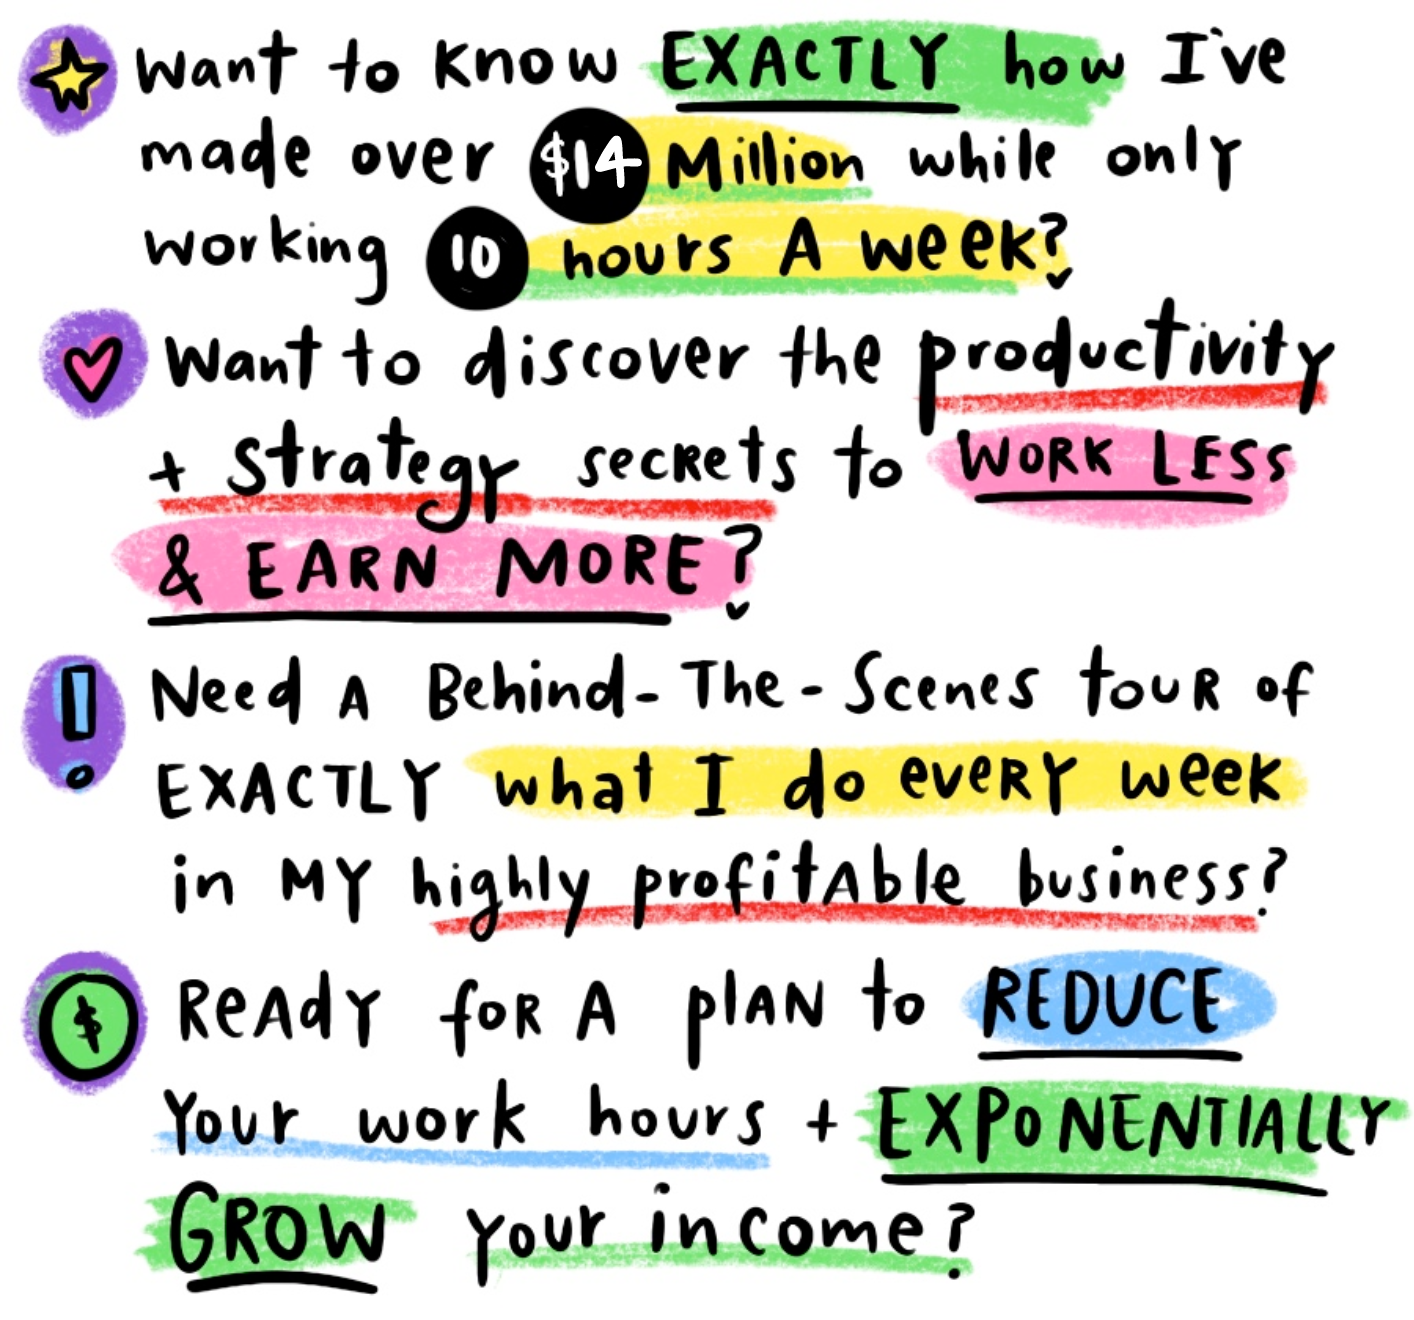 A graphic of handwritten style font bullet points, periodic crayon style highlights of color through out. The text reads<br />
- what to know exactly how I've made over $14million while only working 10 hours a week?<br />
- want to discover the productivity and strategy secrets to Work Less and Earn More?<br />
- Need a behind the scenes tour of EXACTLY waht I do every week in my highly profitable business?<br />
- ready for a plan to reduce your work hours + exponentially grow your income?